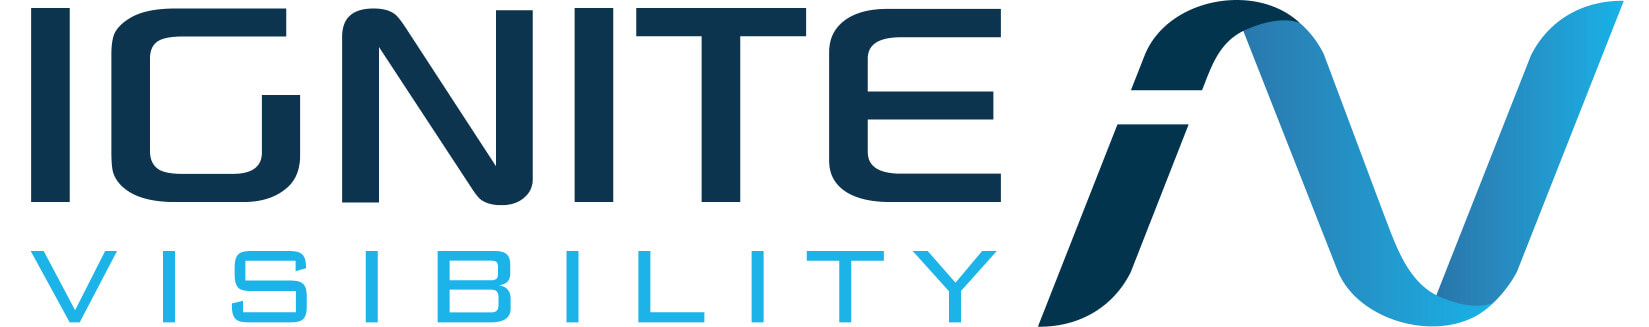 Top Local Online Marketing Agency Logo: Ignite Visibility